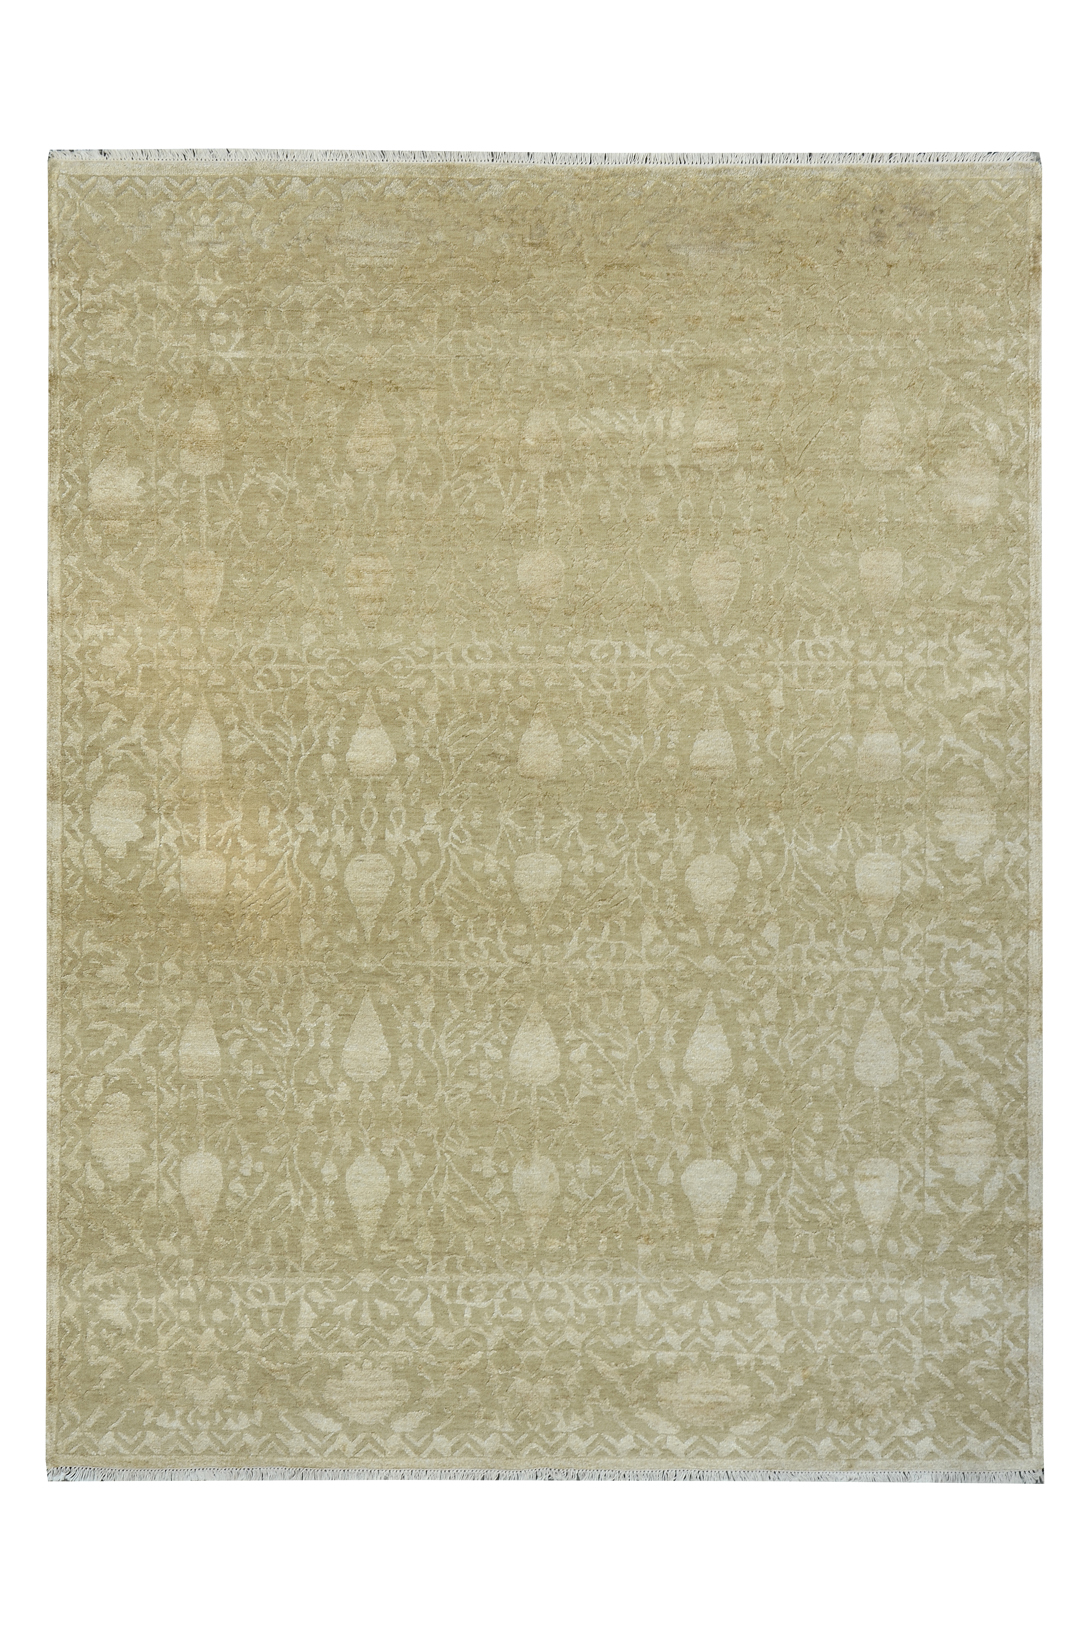 HAND KNOTTED CARPET AYC1035